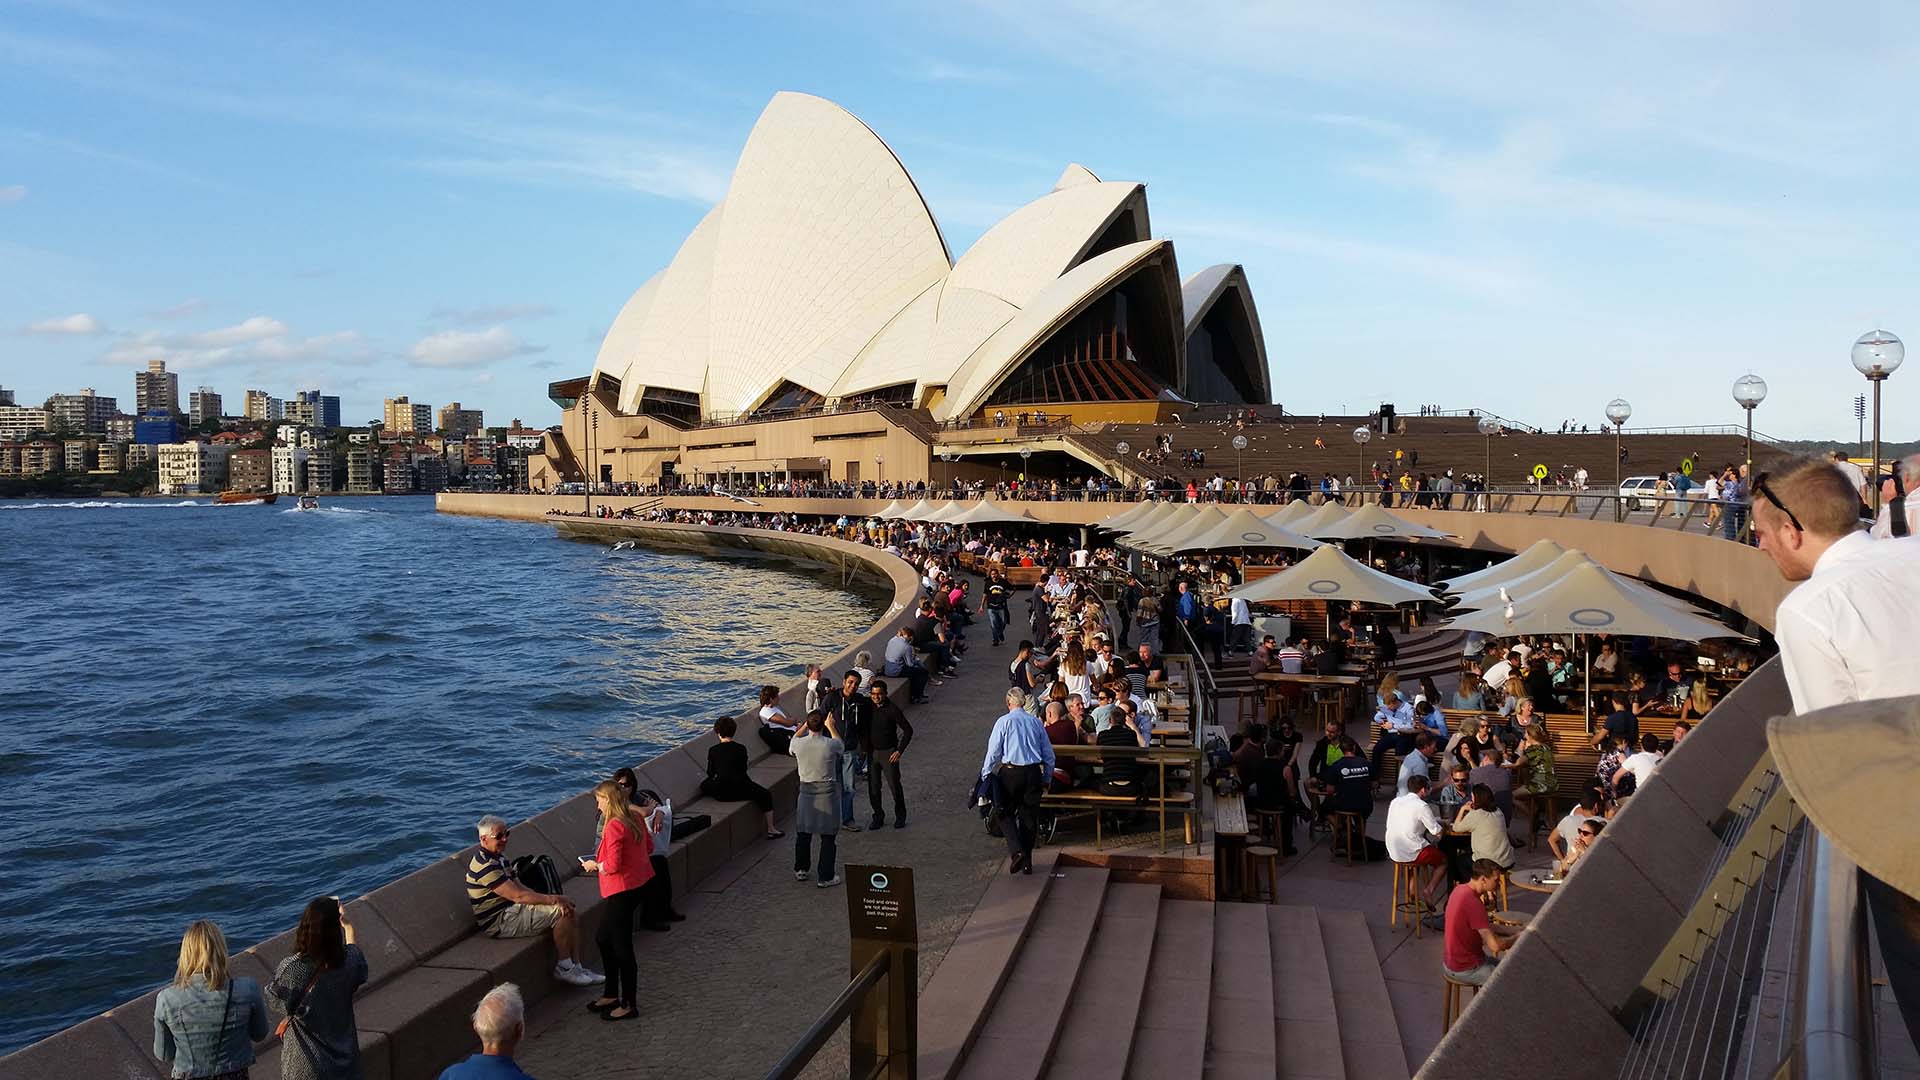 Sydney Is the Tenth Most Expensive City in the World Again According to This Cost of Living Report